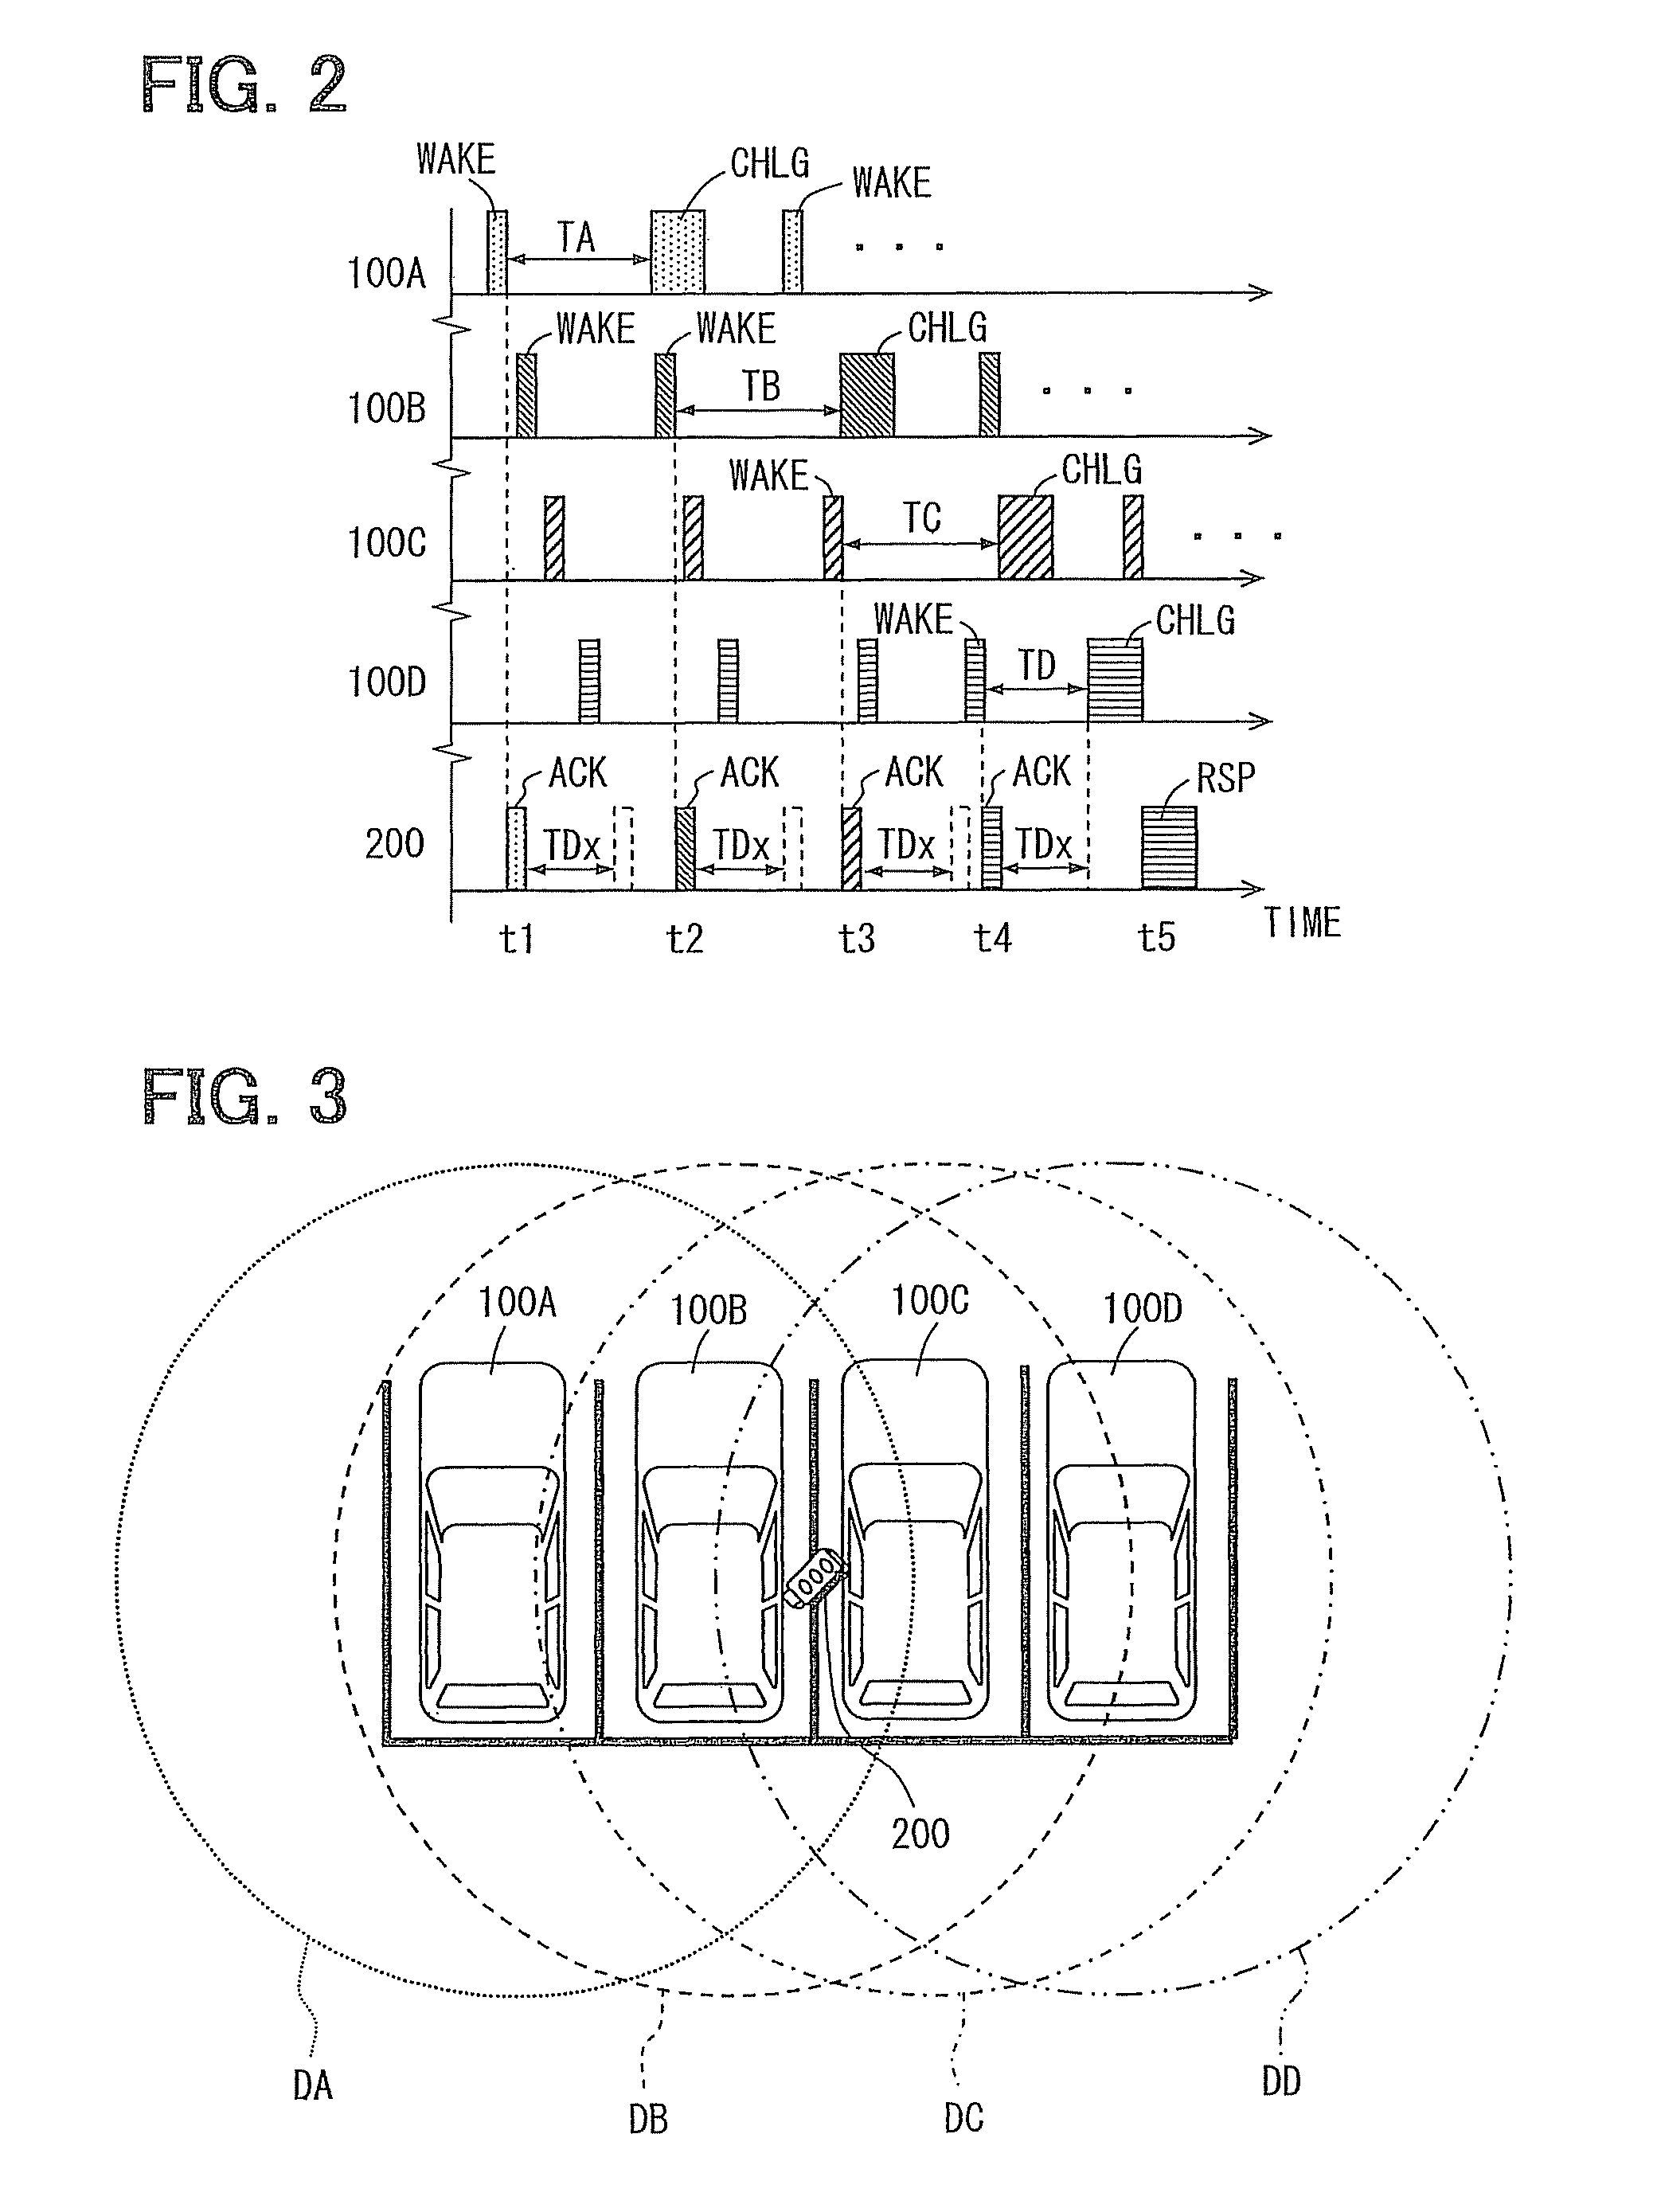 Vehicle device control system with a disabling feature